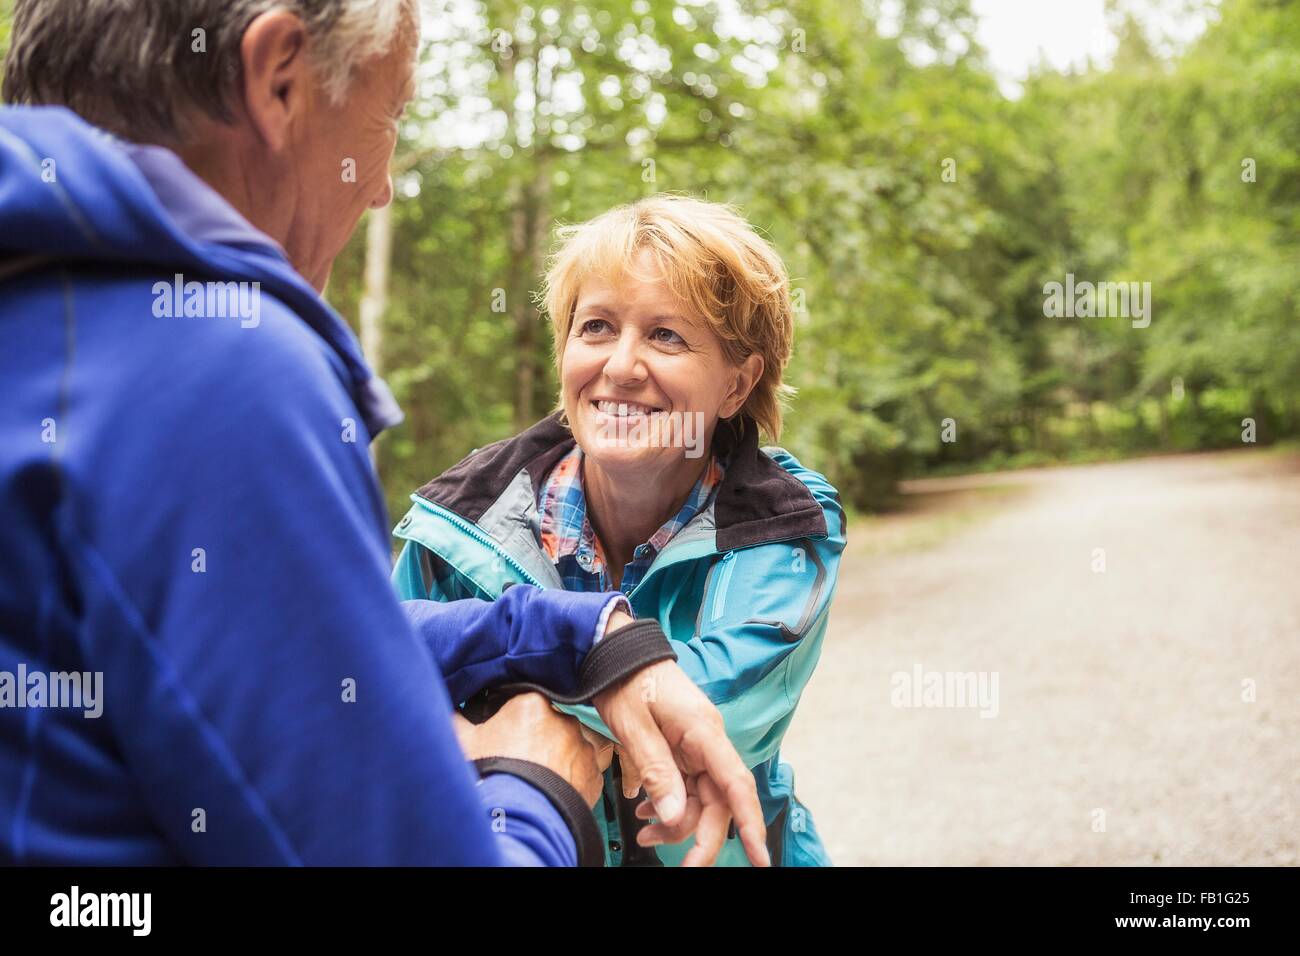 Couple on pathway in forest, face to face, smiling Stock Photo